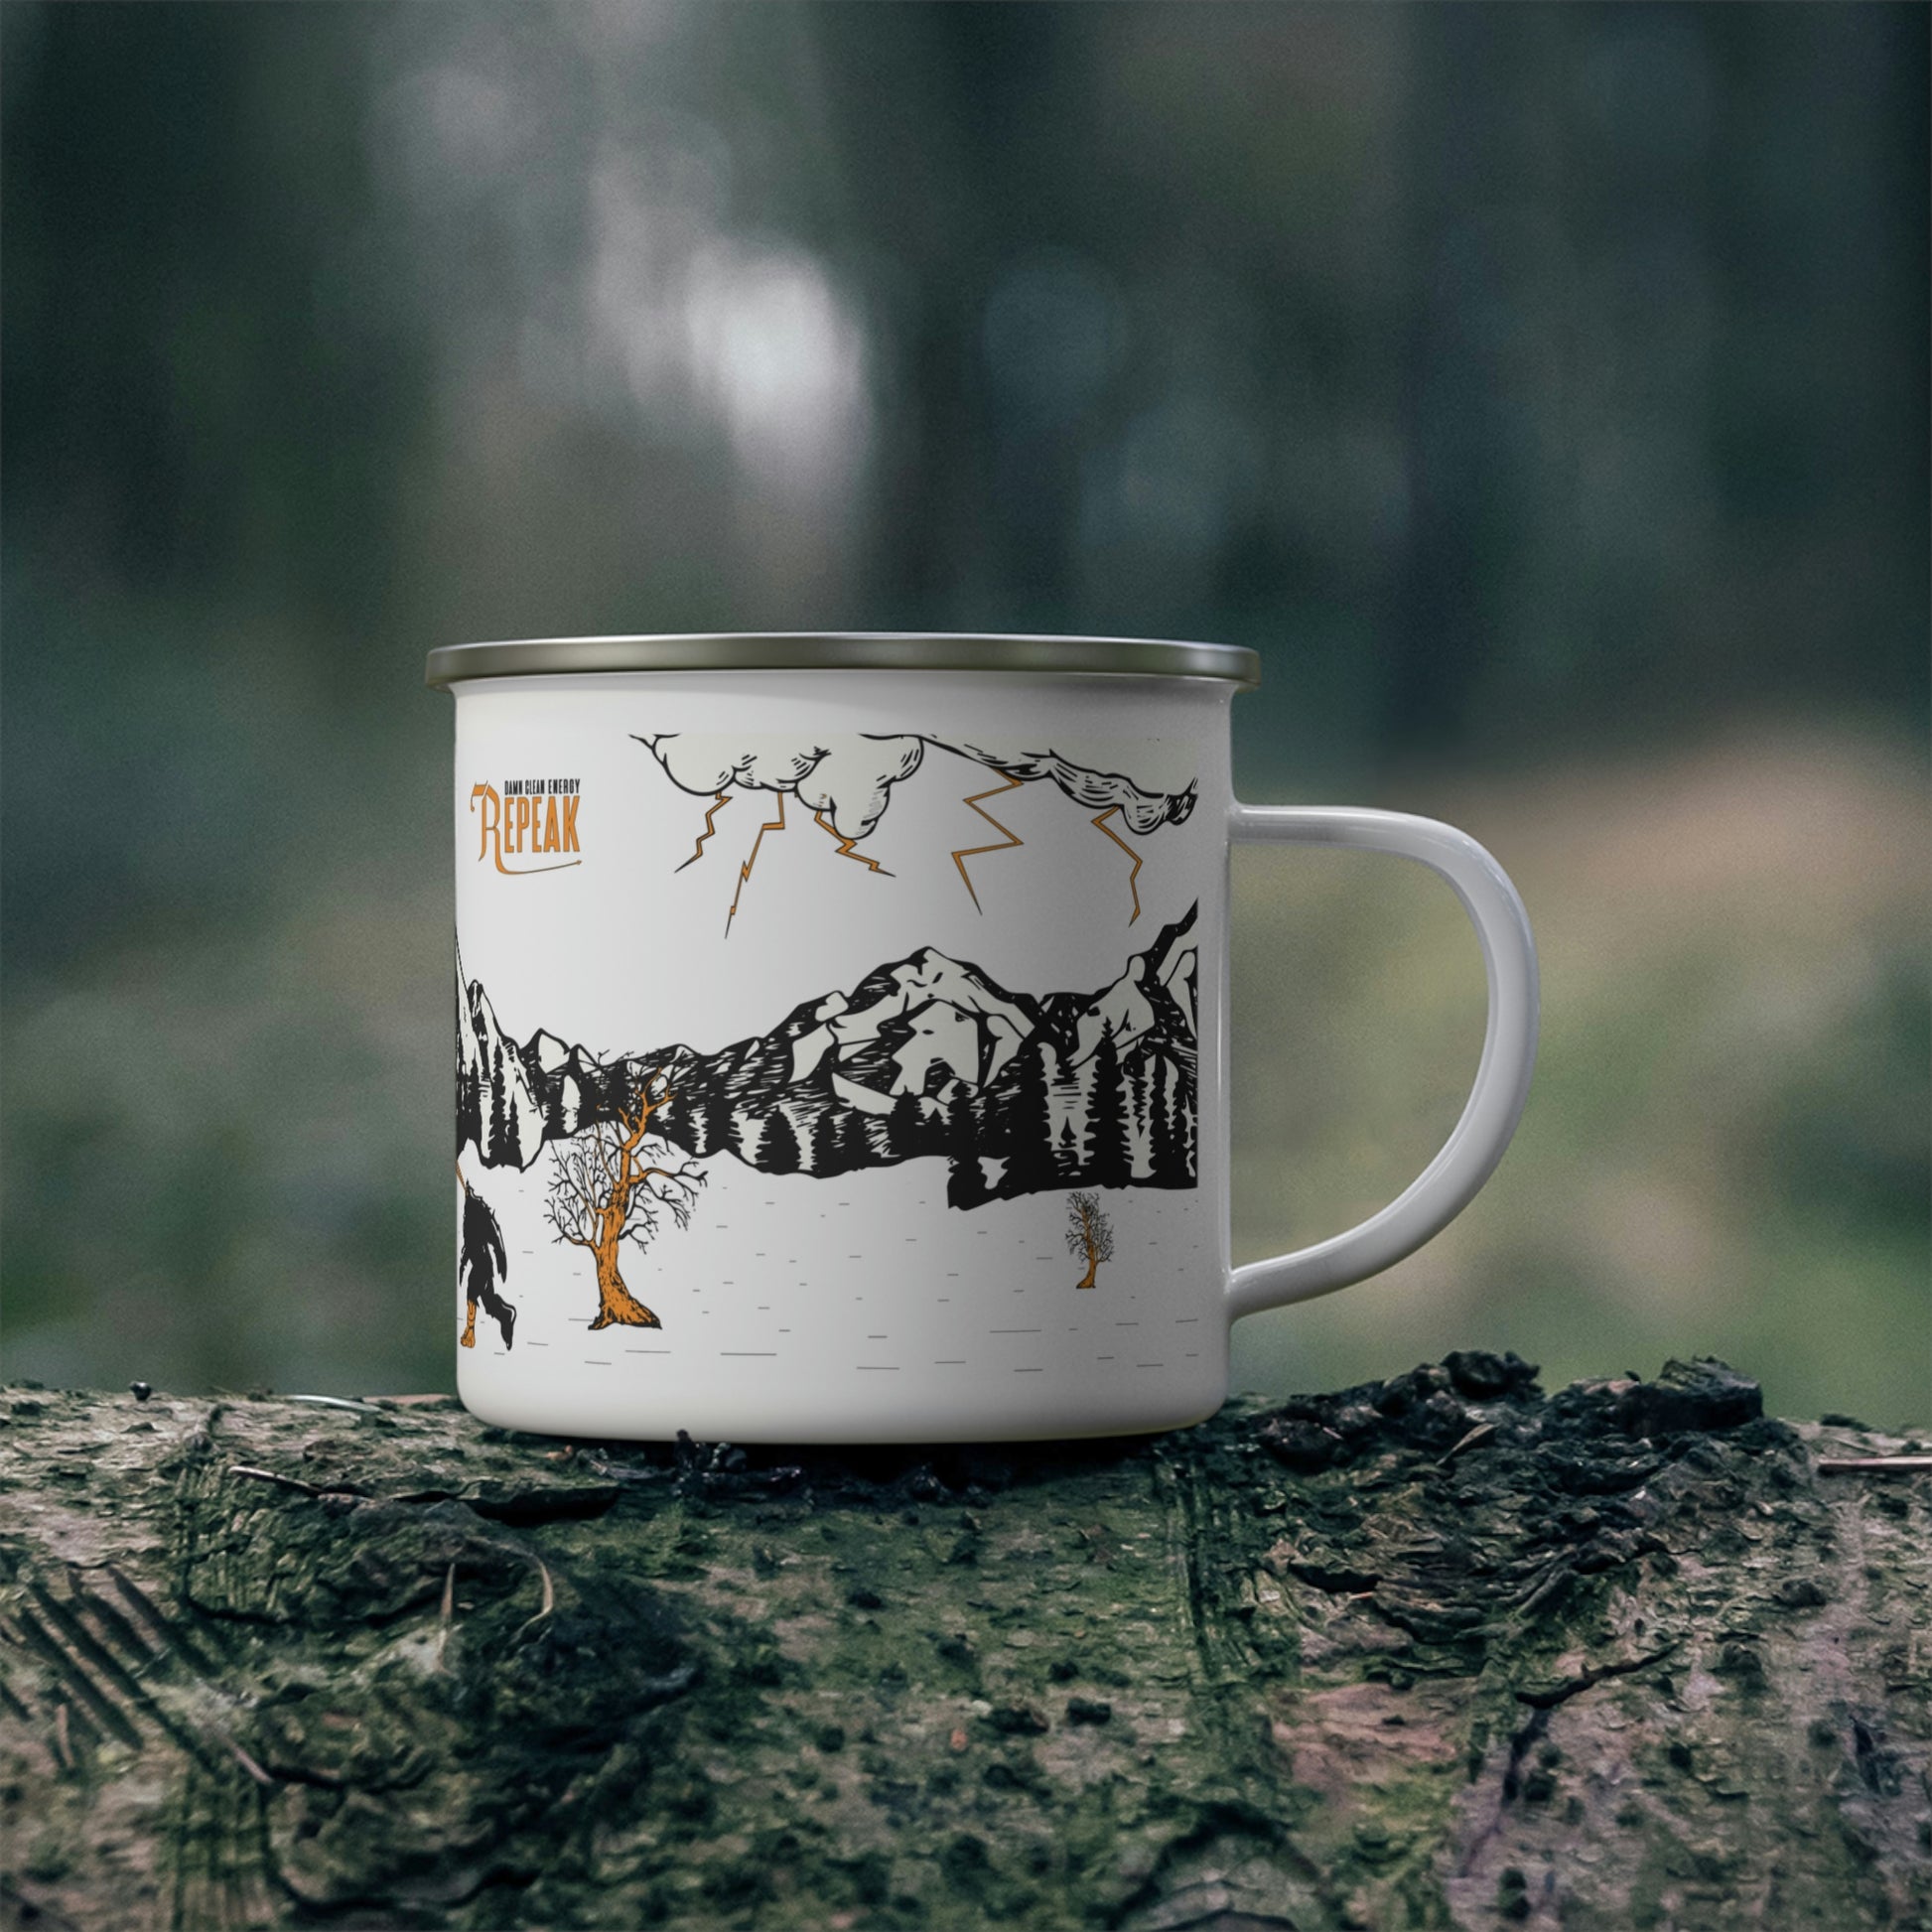 repeak energy camping mug, side angle in forest